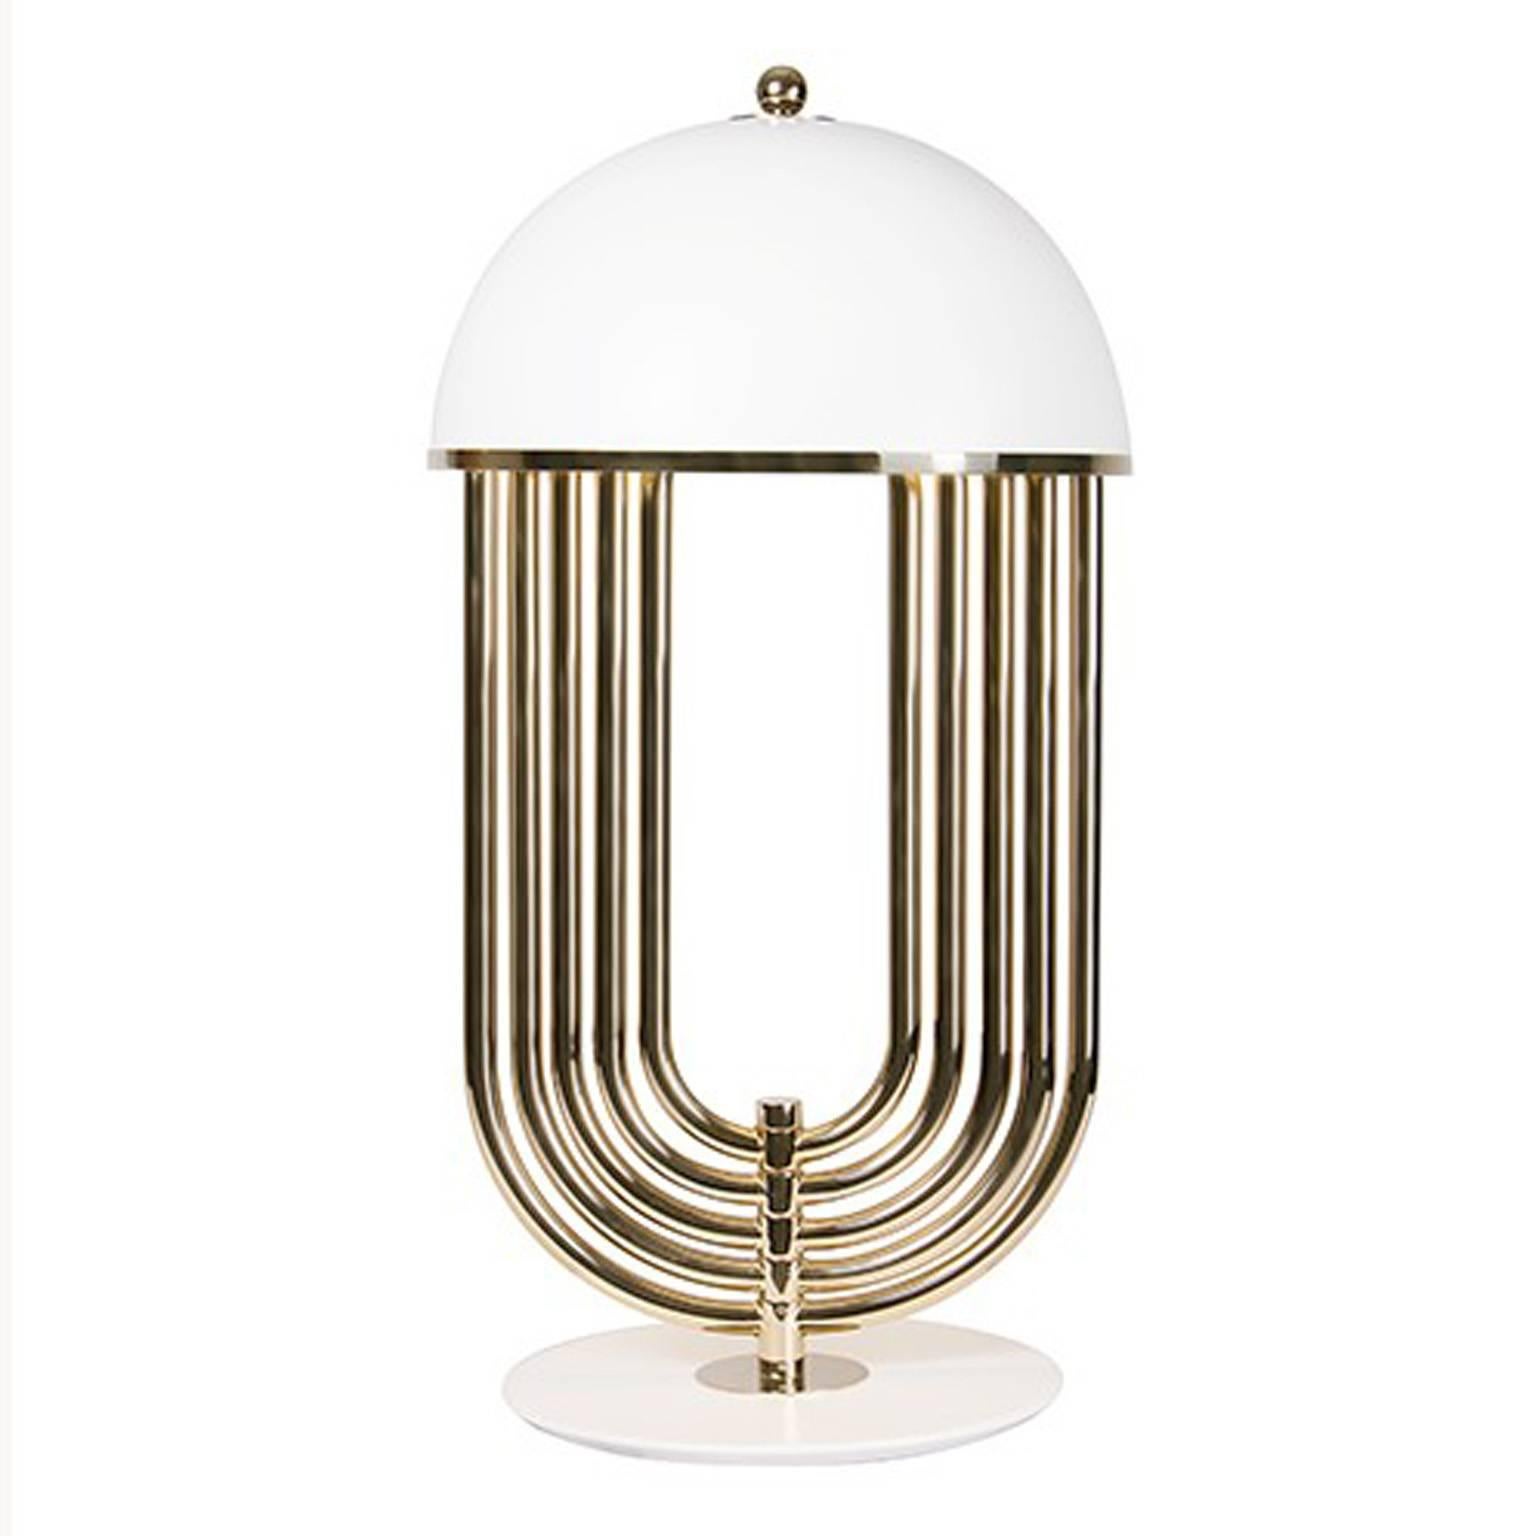 Turner Table Lamp in White and Gold In Excellent Condition For Sale In Central, HK